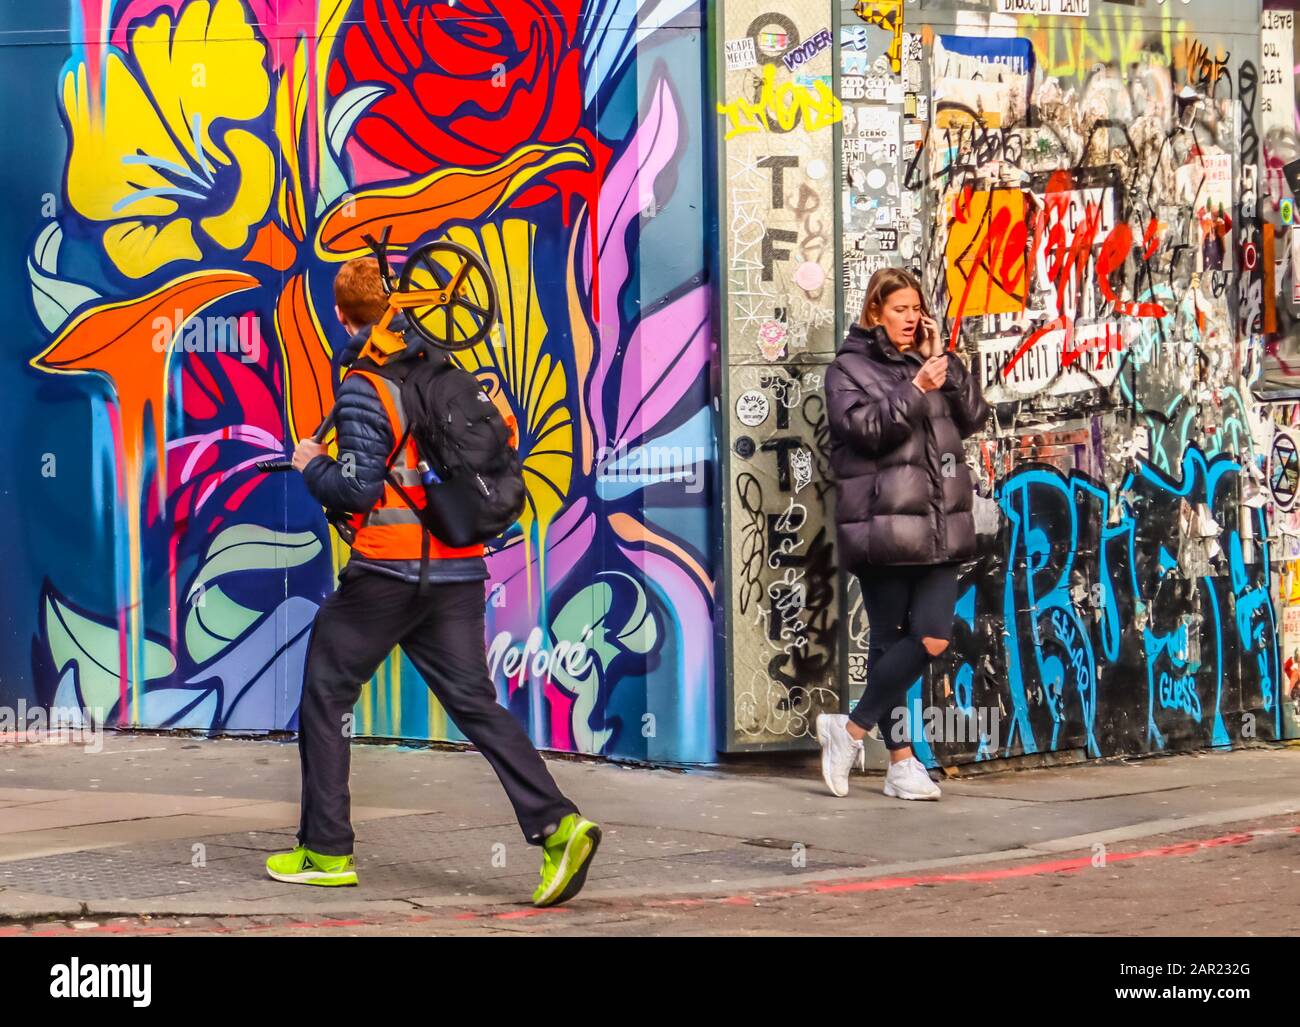 Grafitti on the street with passers-by Stock Photo